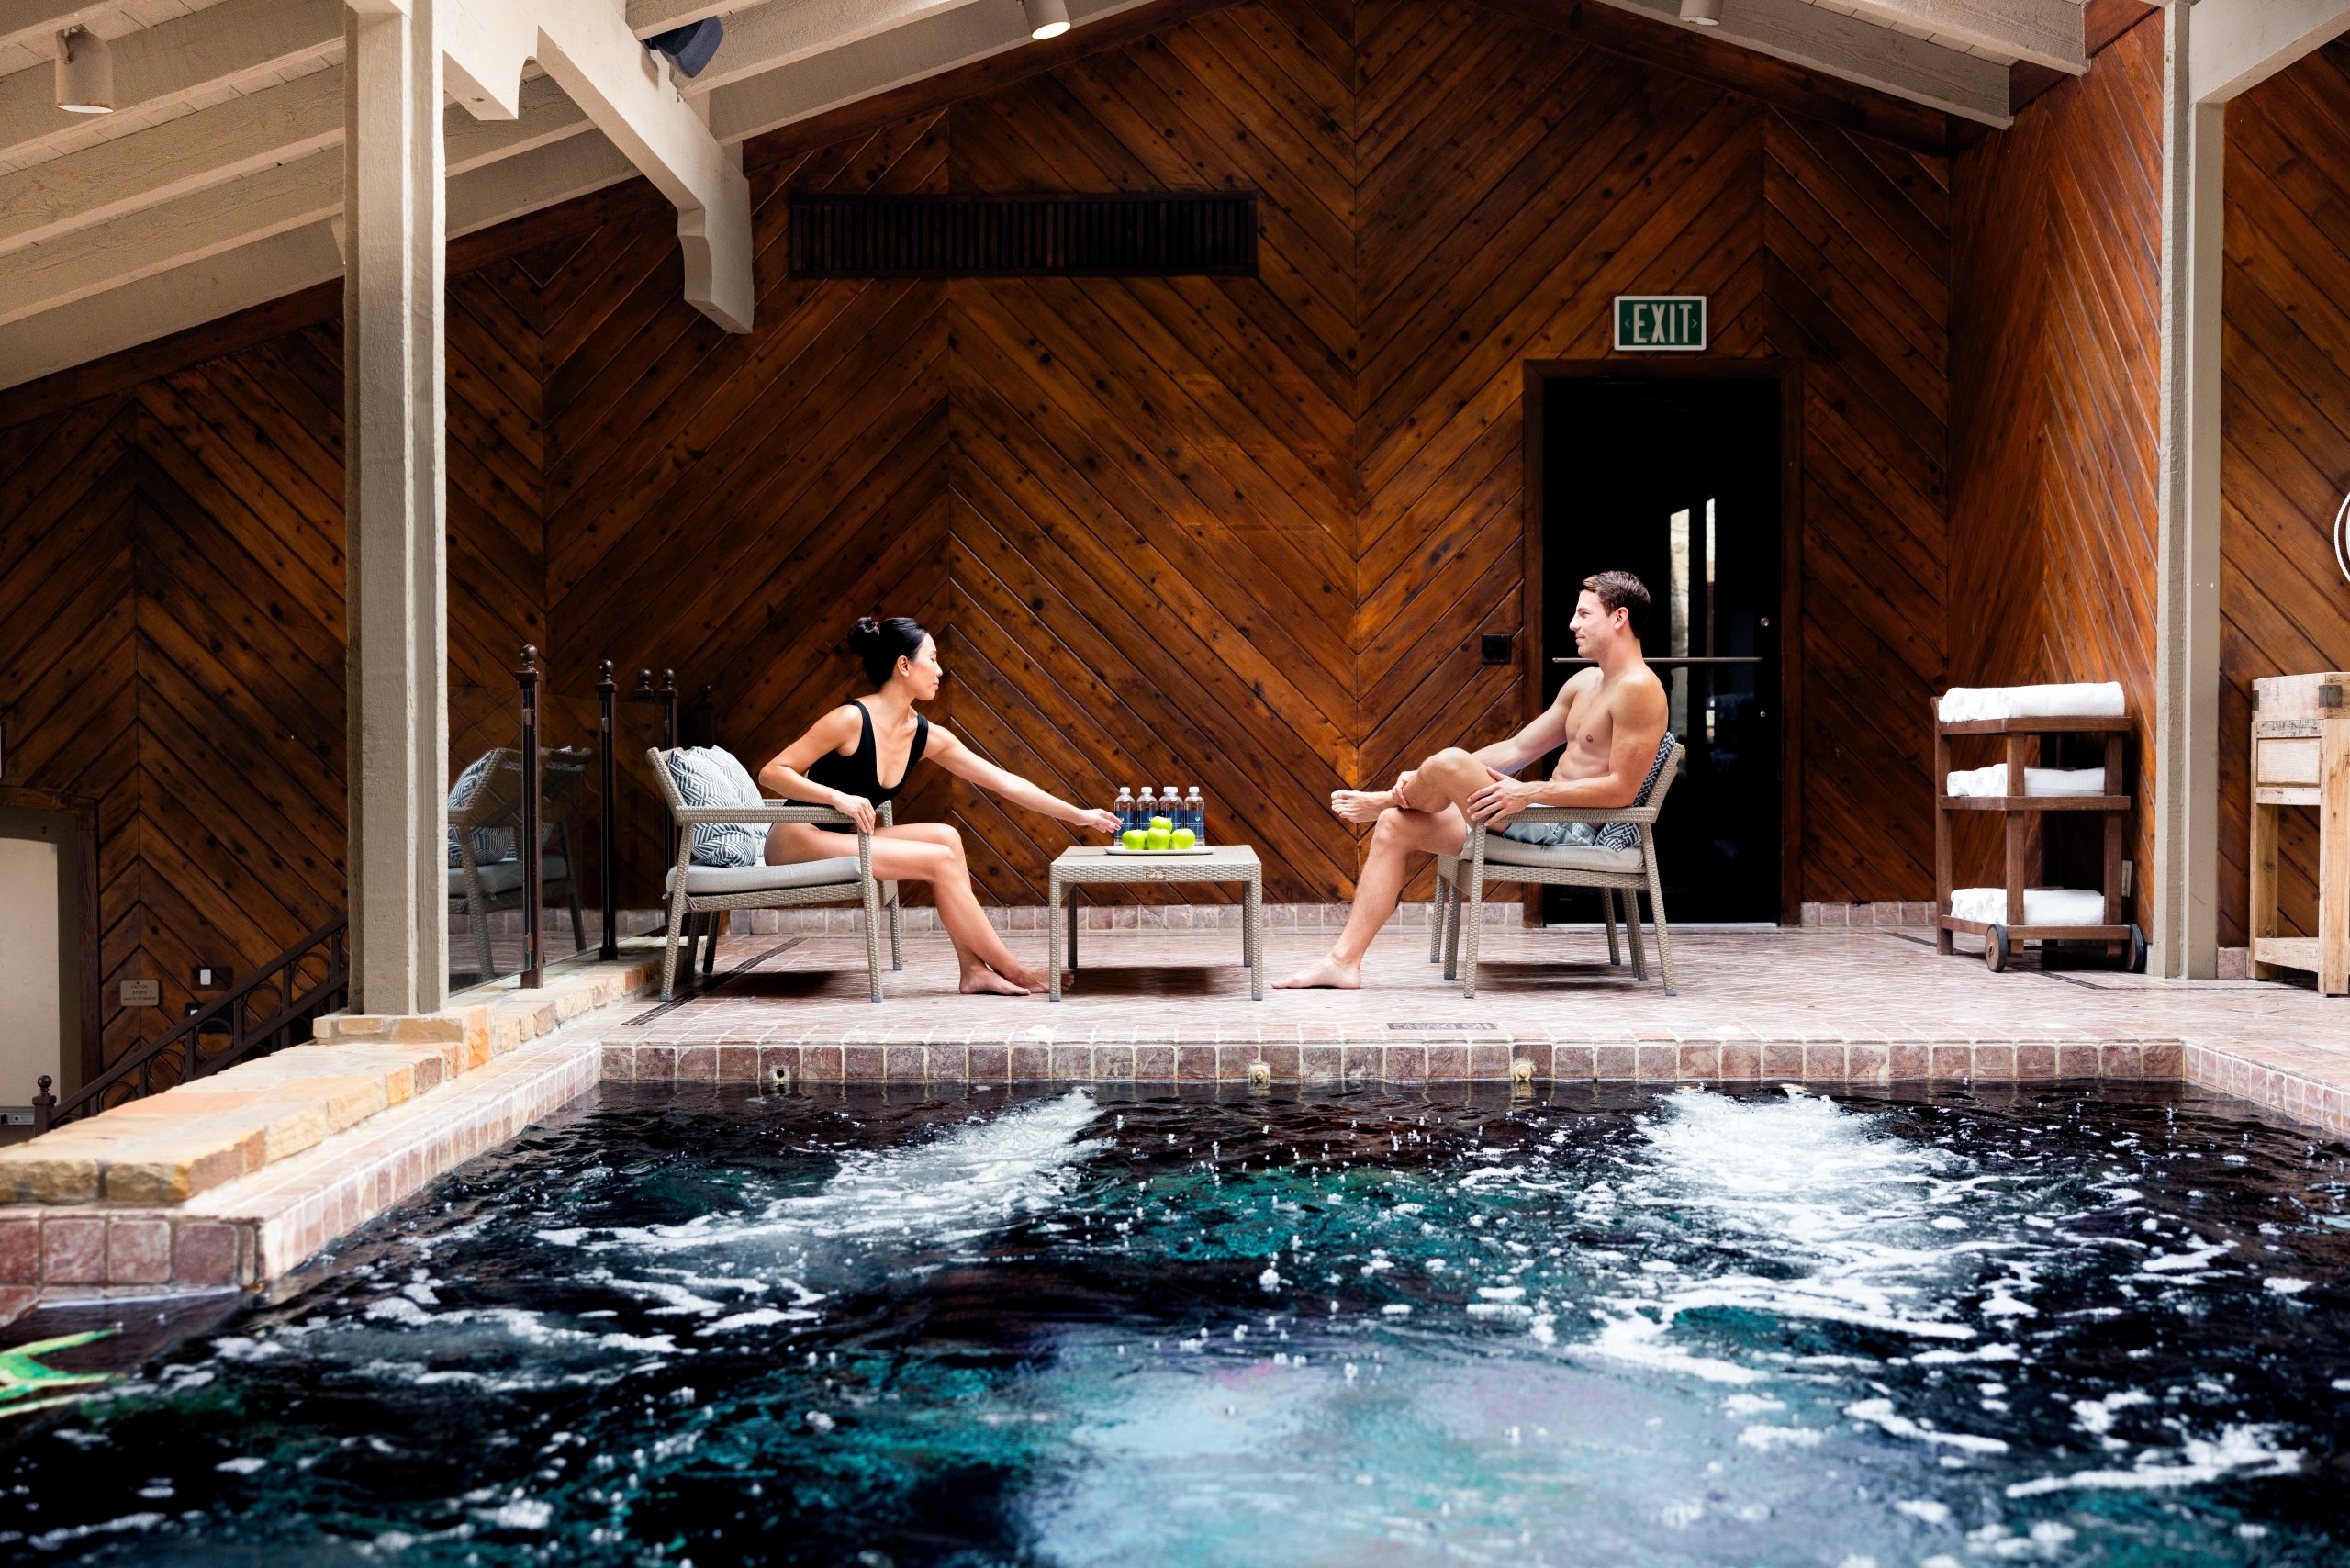 A man and a woman sitting by the indoor pool at the spa.